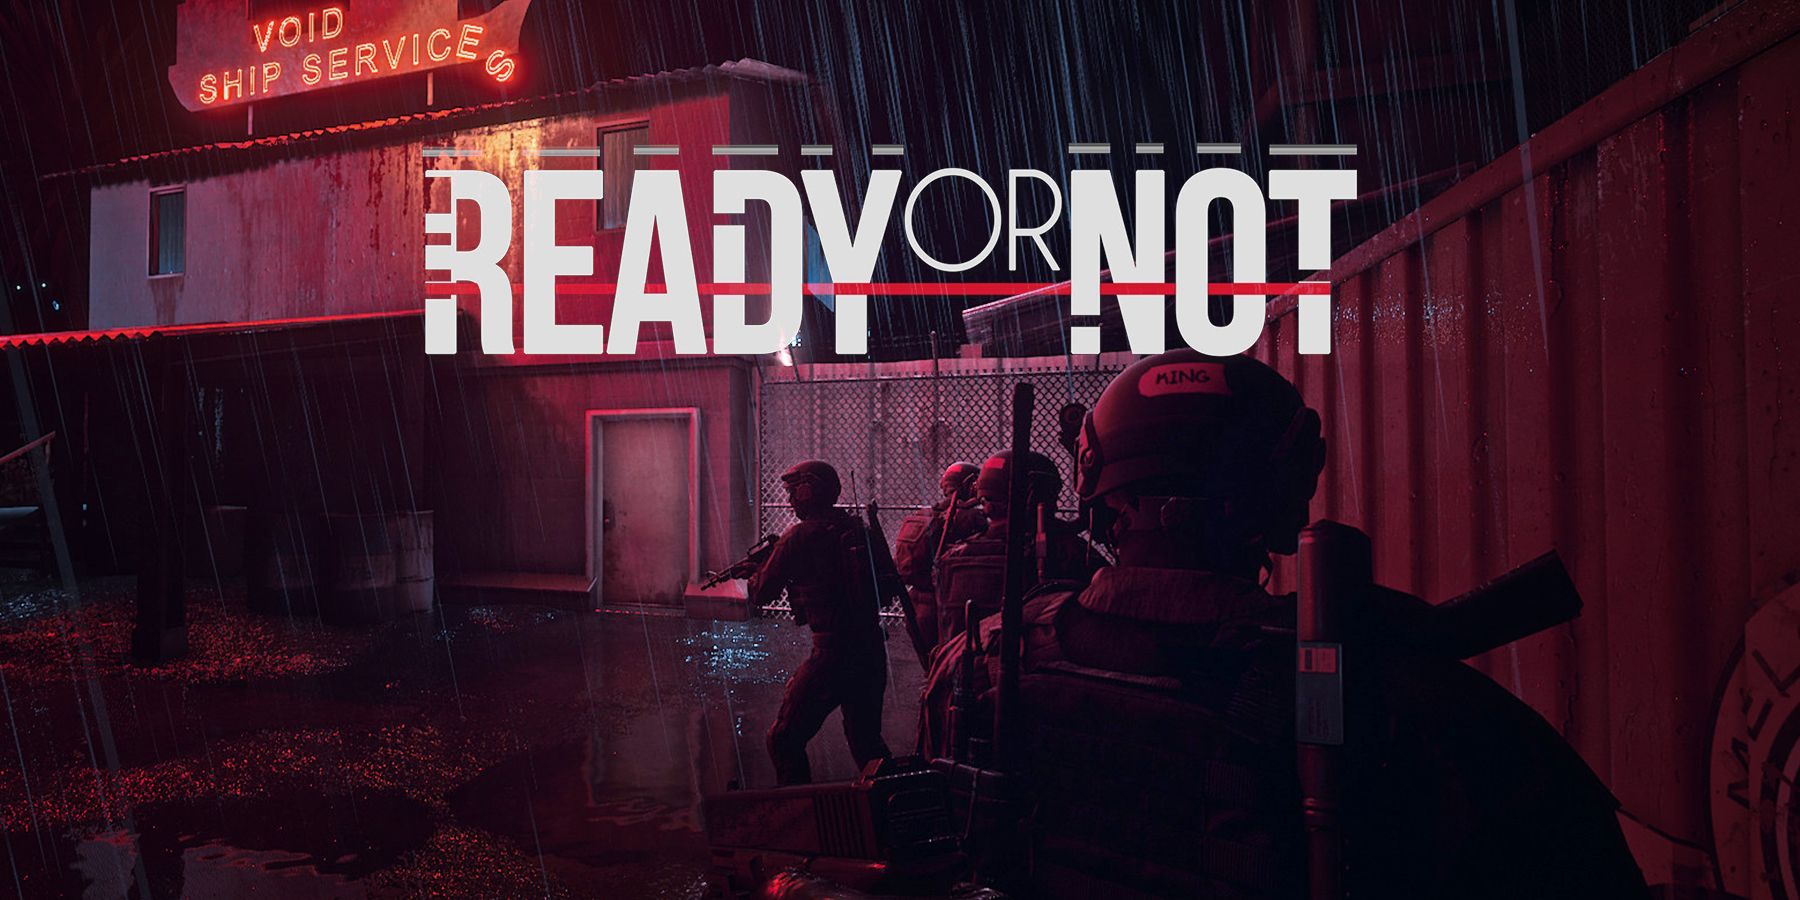 Ready or Not 1.0 Launch : r/pcgaming